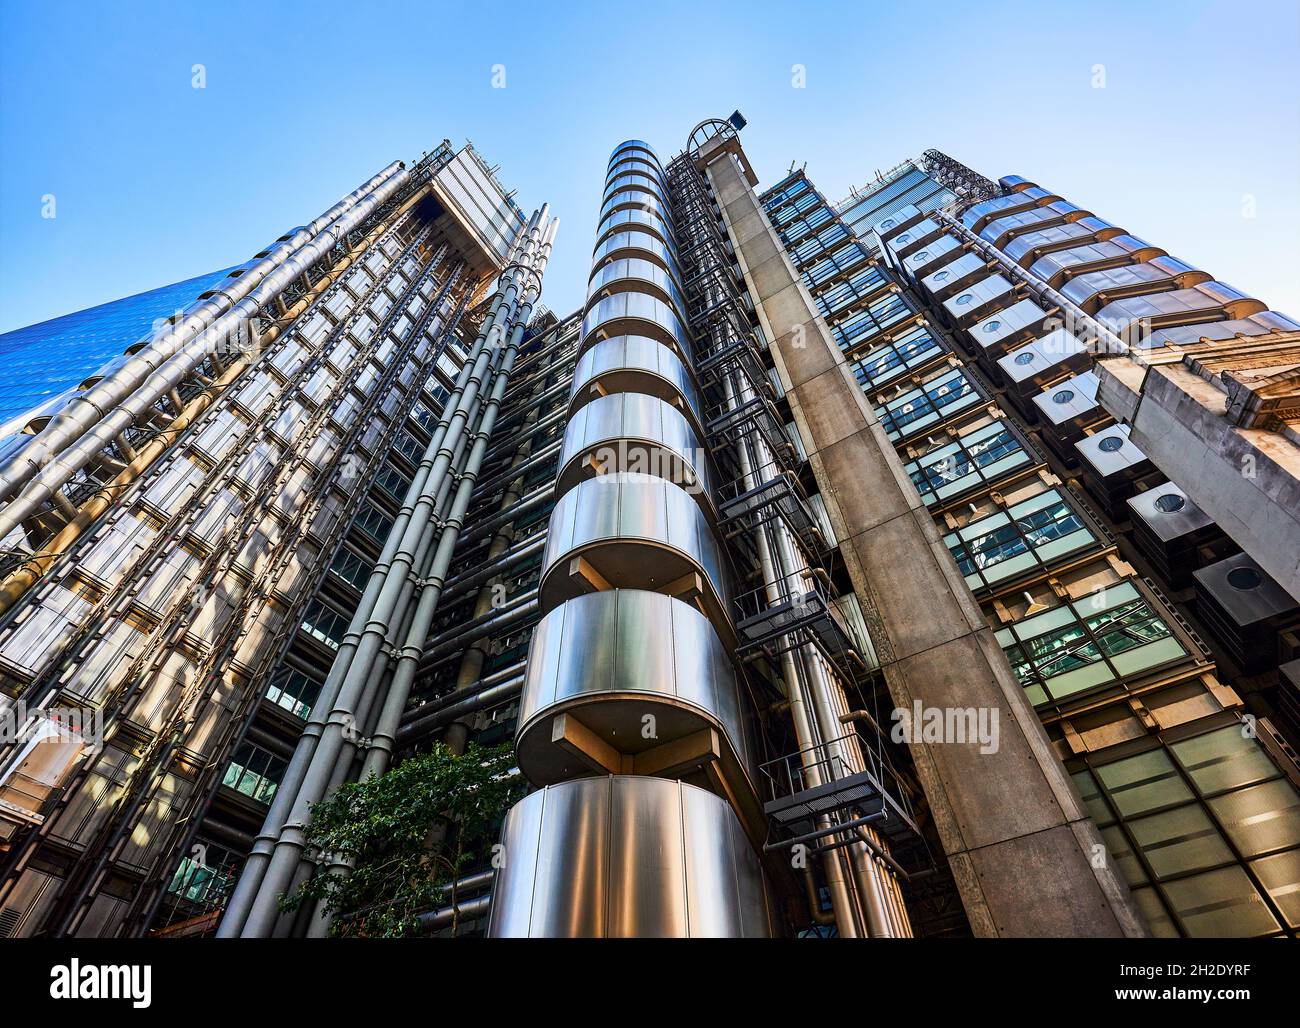 Lloyd's Building in Lime Street, City of London, insurance industry in the financial district, Bowellism architecture, now a Grade 1 listed building Stock Photo